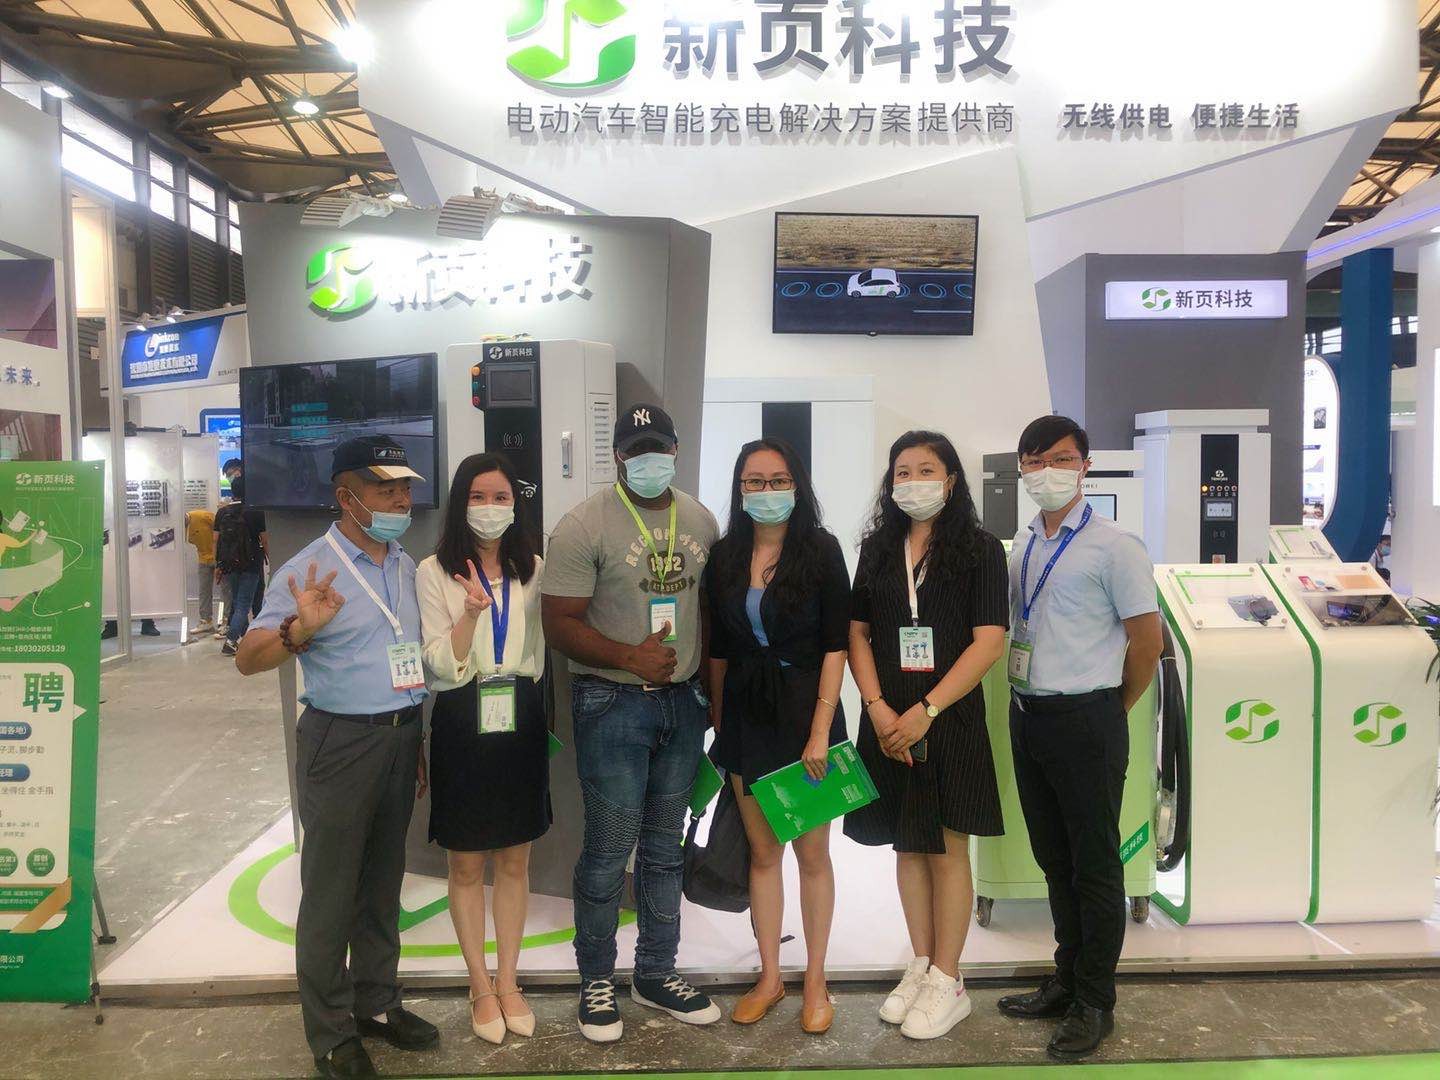 Newyea Technology launched the 14th Shanghai International Charging Facilities Industry Exhibition